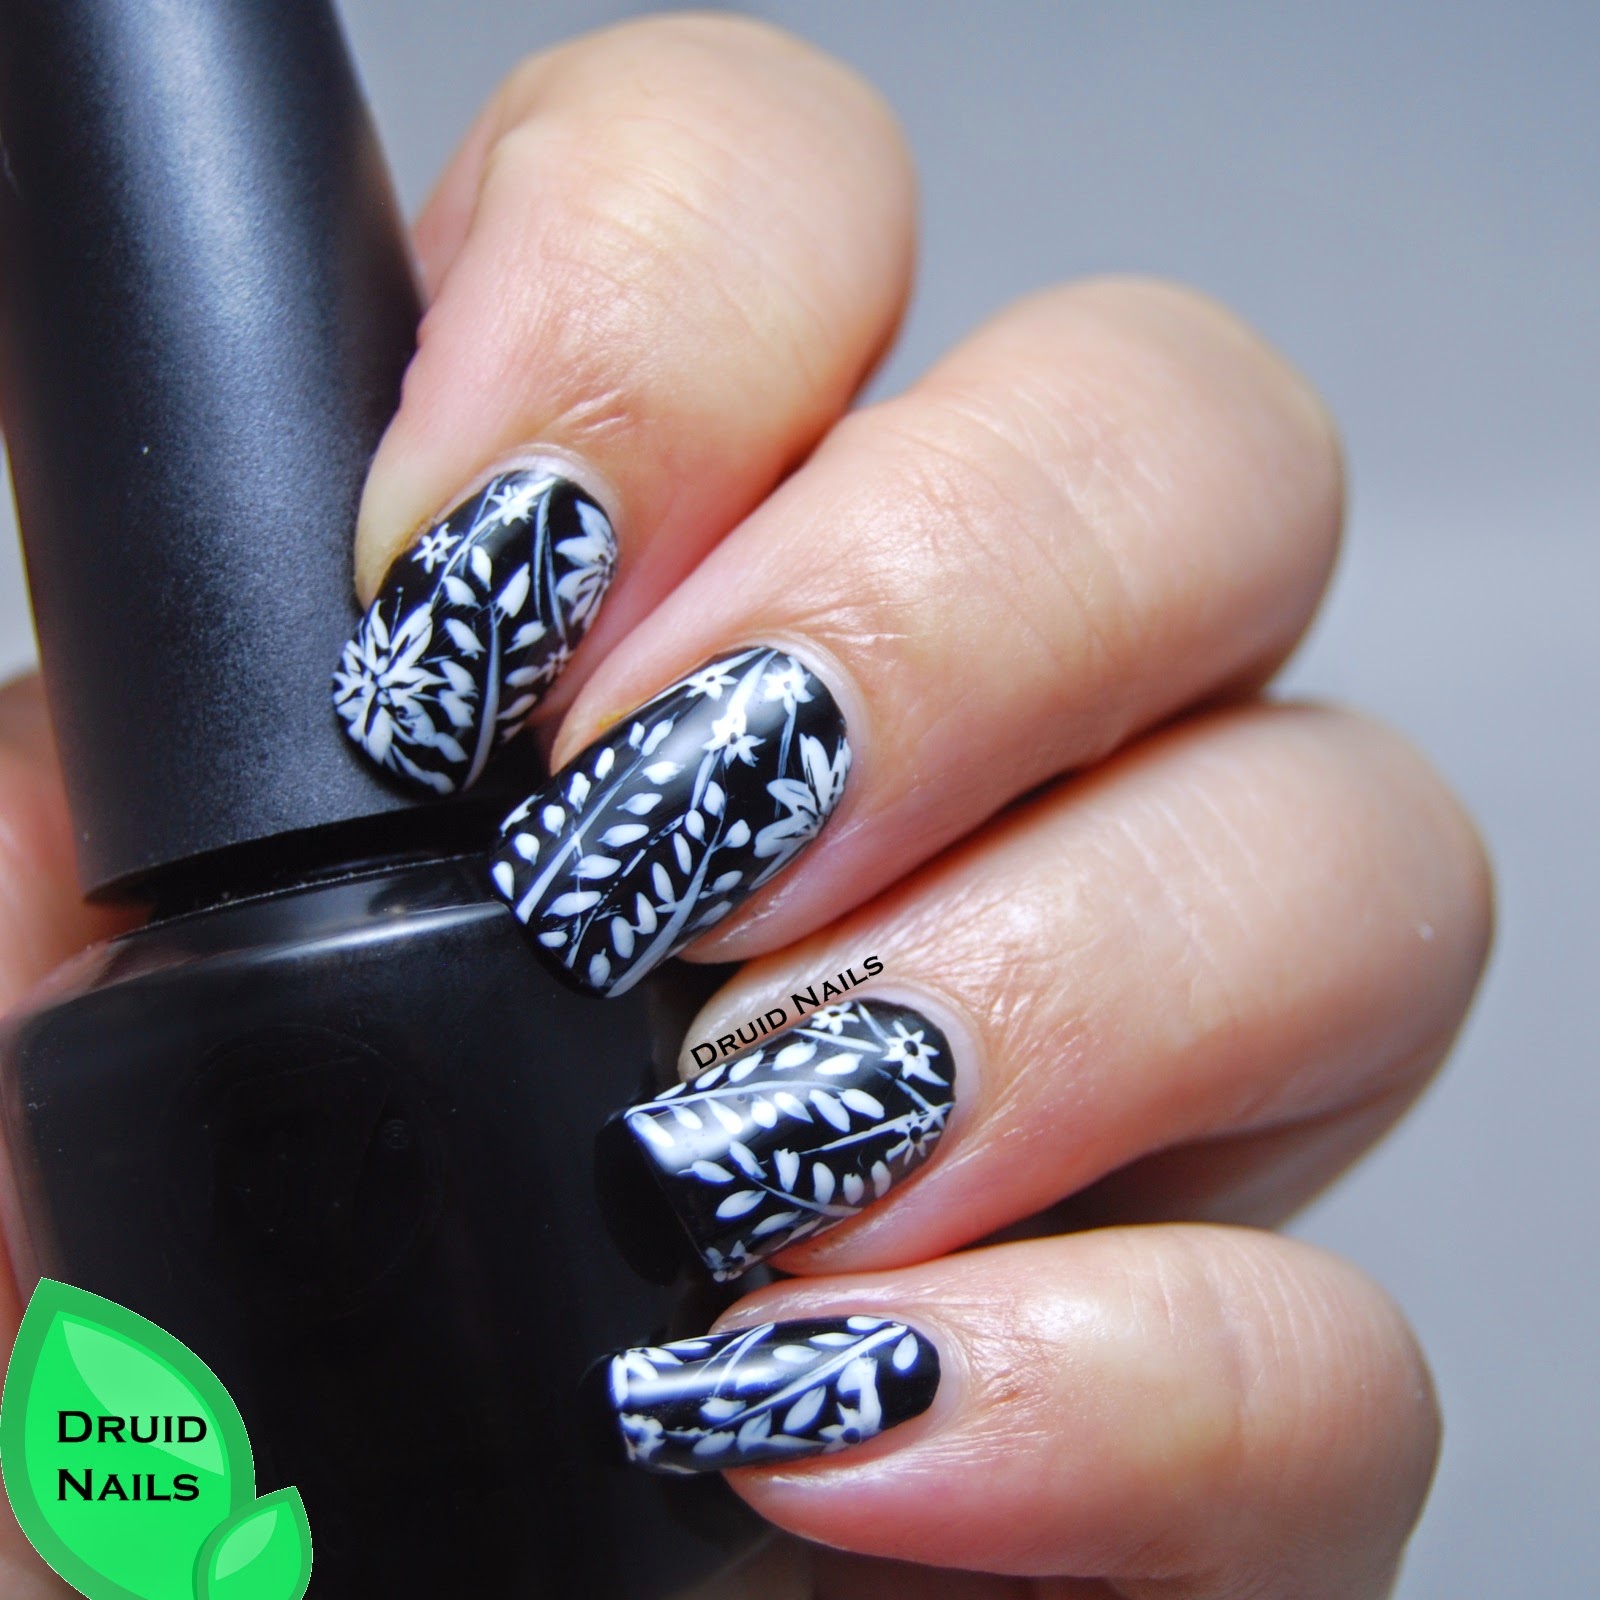 Druid Nails: Golden Oldie Thursday - Black Base with flowers